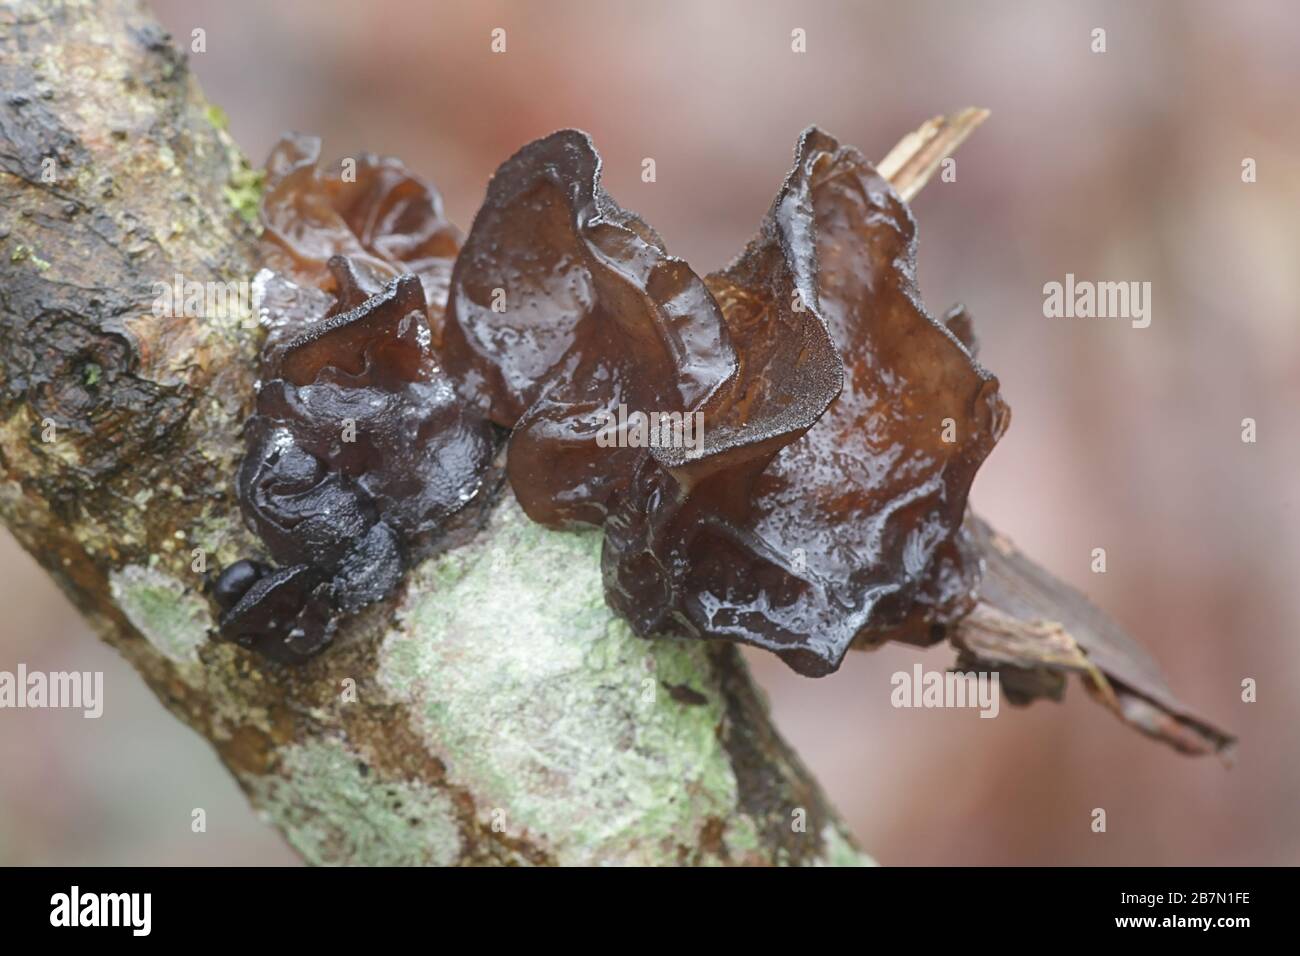 Exidia truncata, known as Witches' Butter, a jelly fungus living on oak Stock Photo